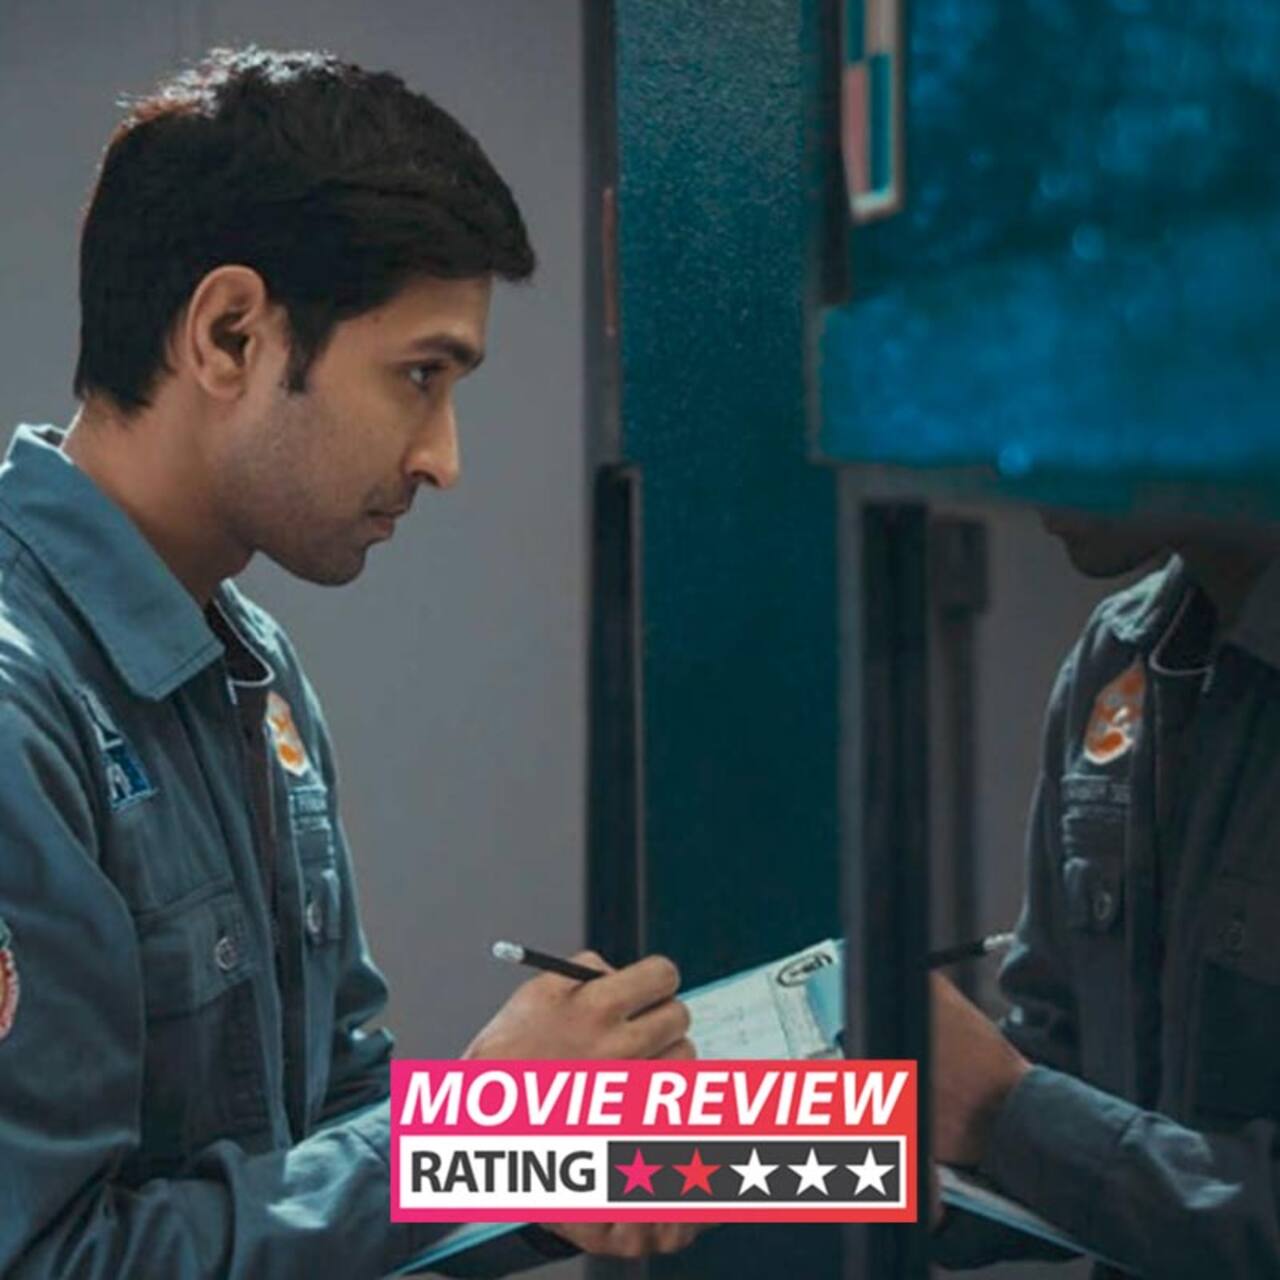 Cargo movie review: Vikrant Massey and Shweta Tripathi's spaceship takes off ingeniously, but runs out of fuel midway